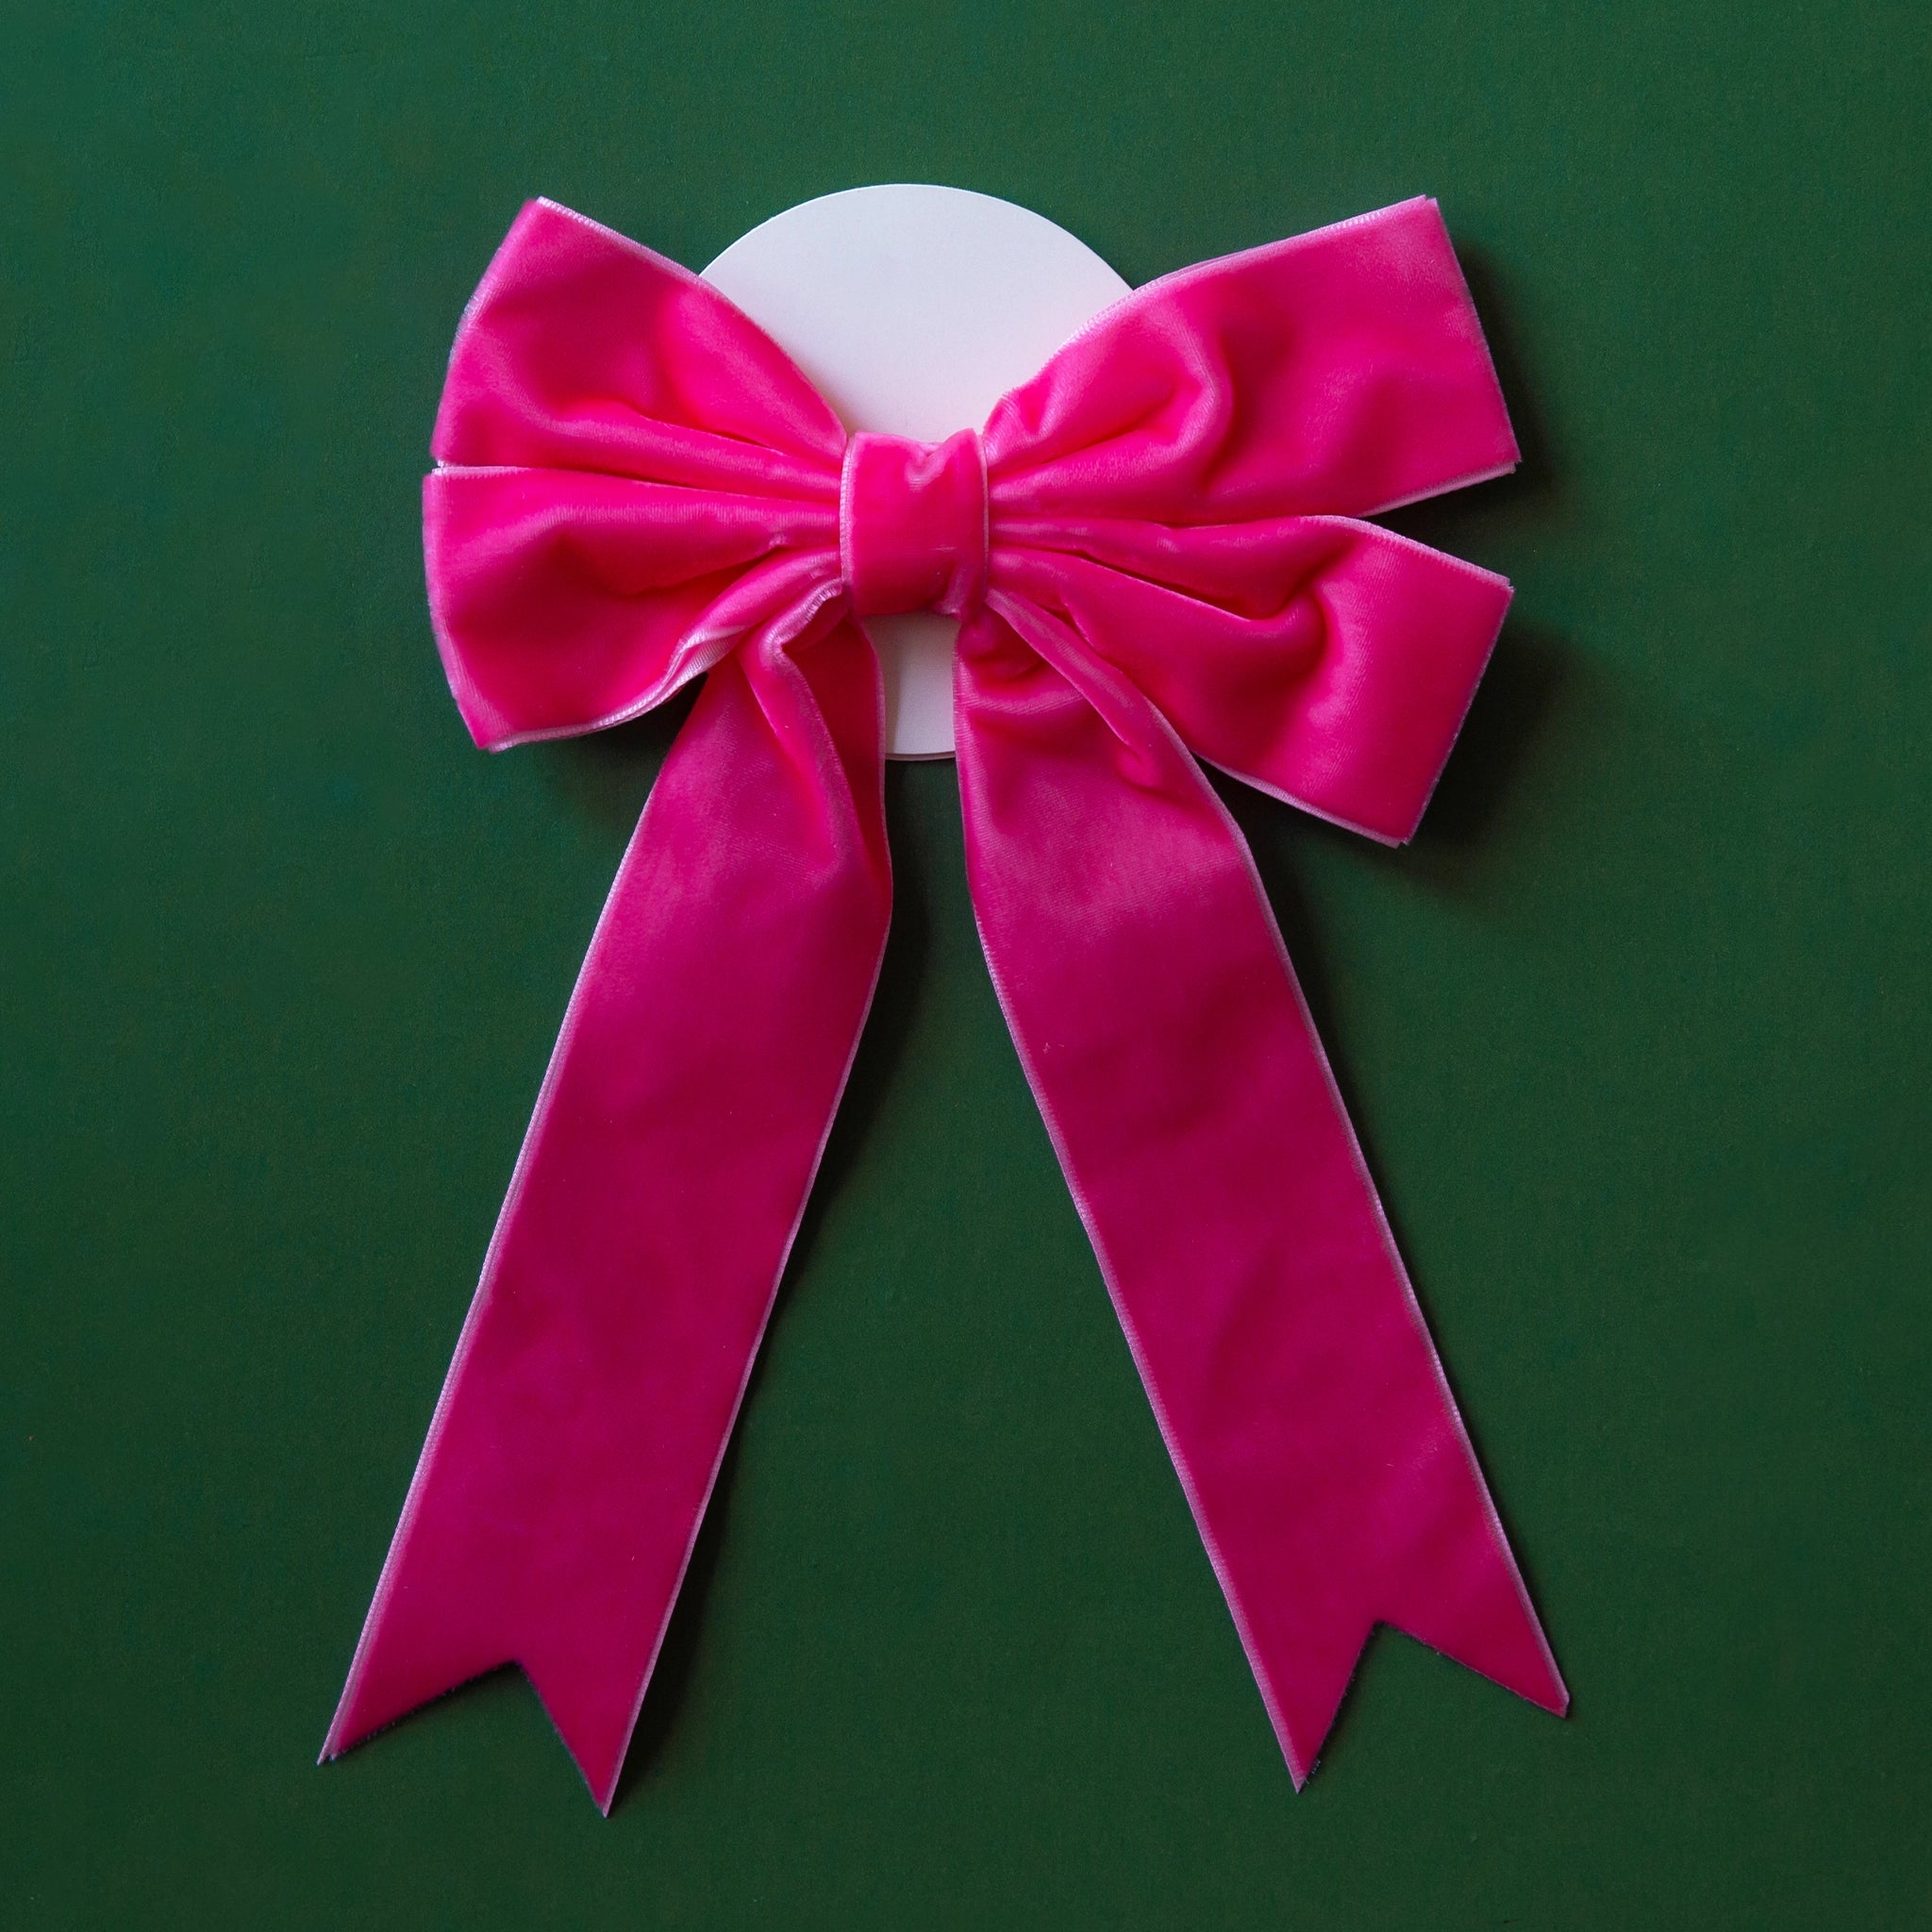 On a green background is a bright pink velvet bow.